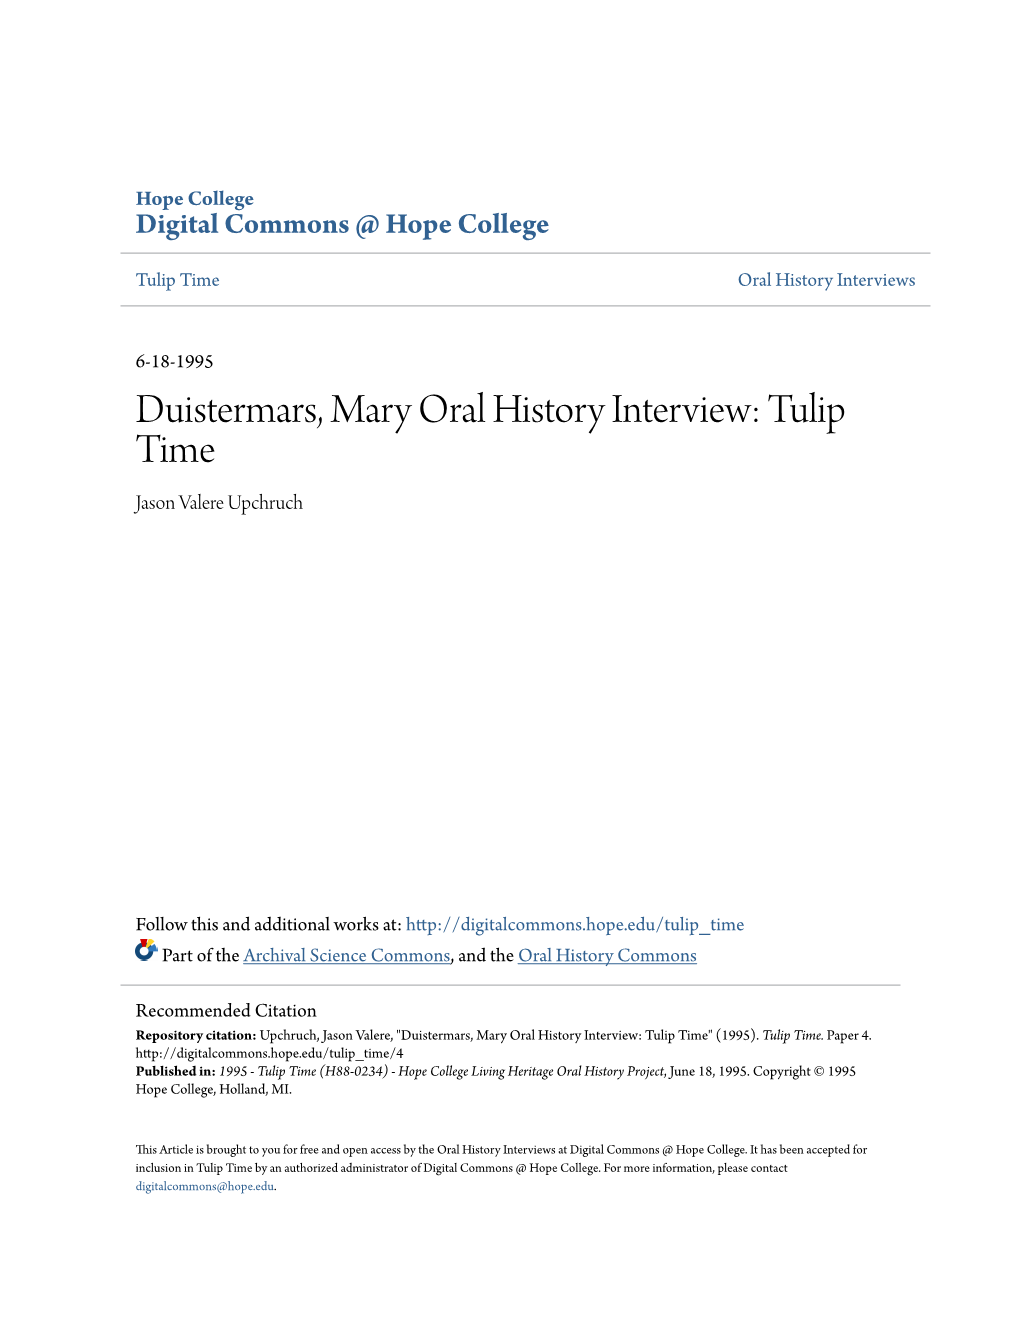 Duistermars, Mary Oral History Interview: Tulip Time Jason Valere Upchruch